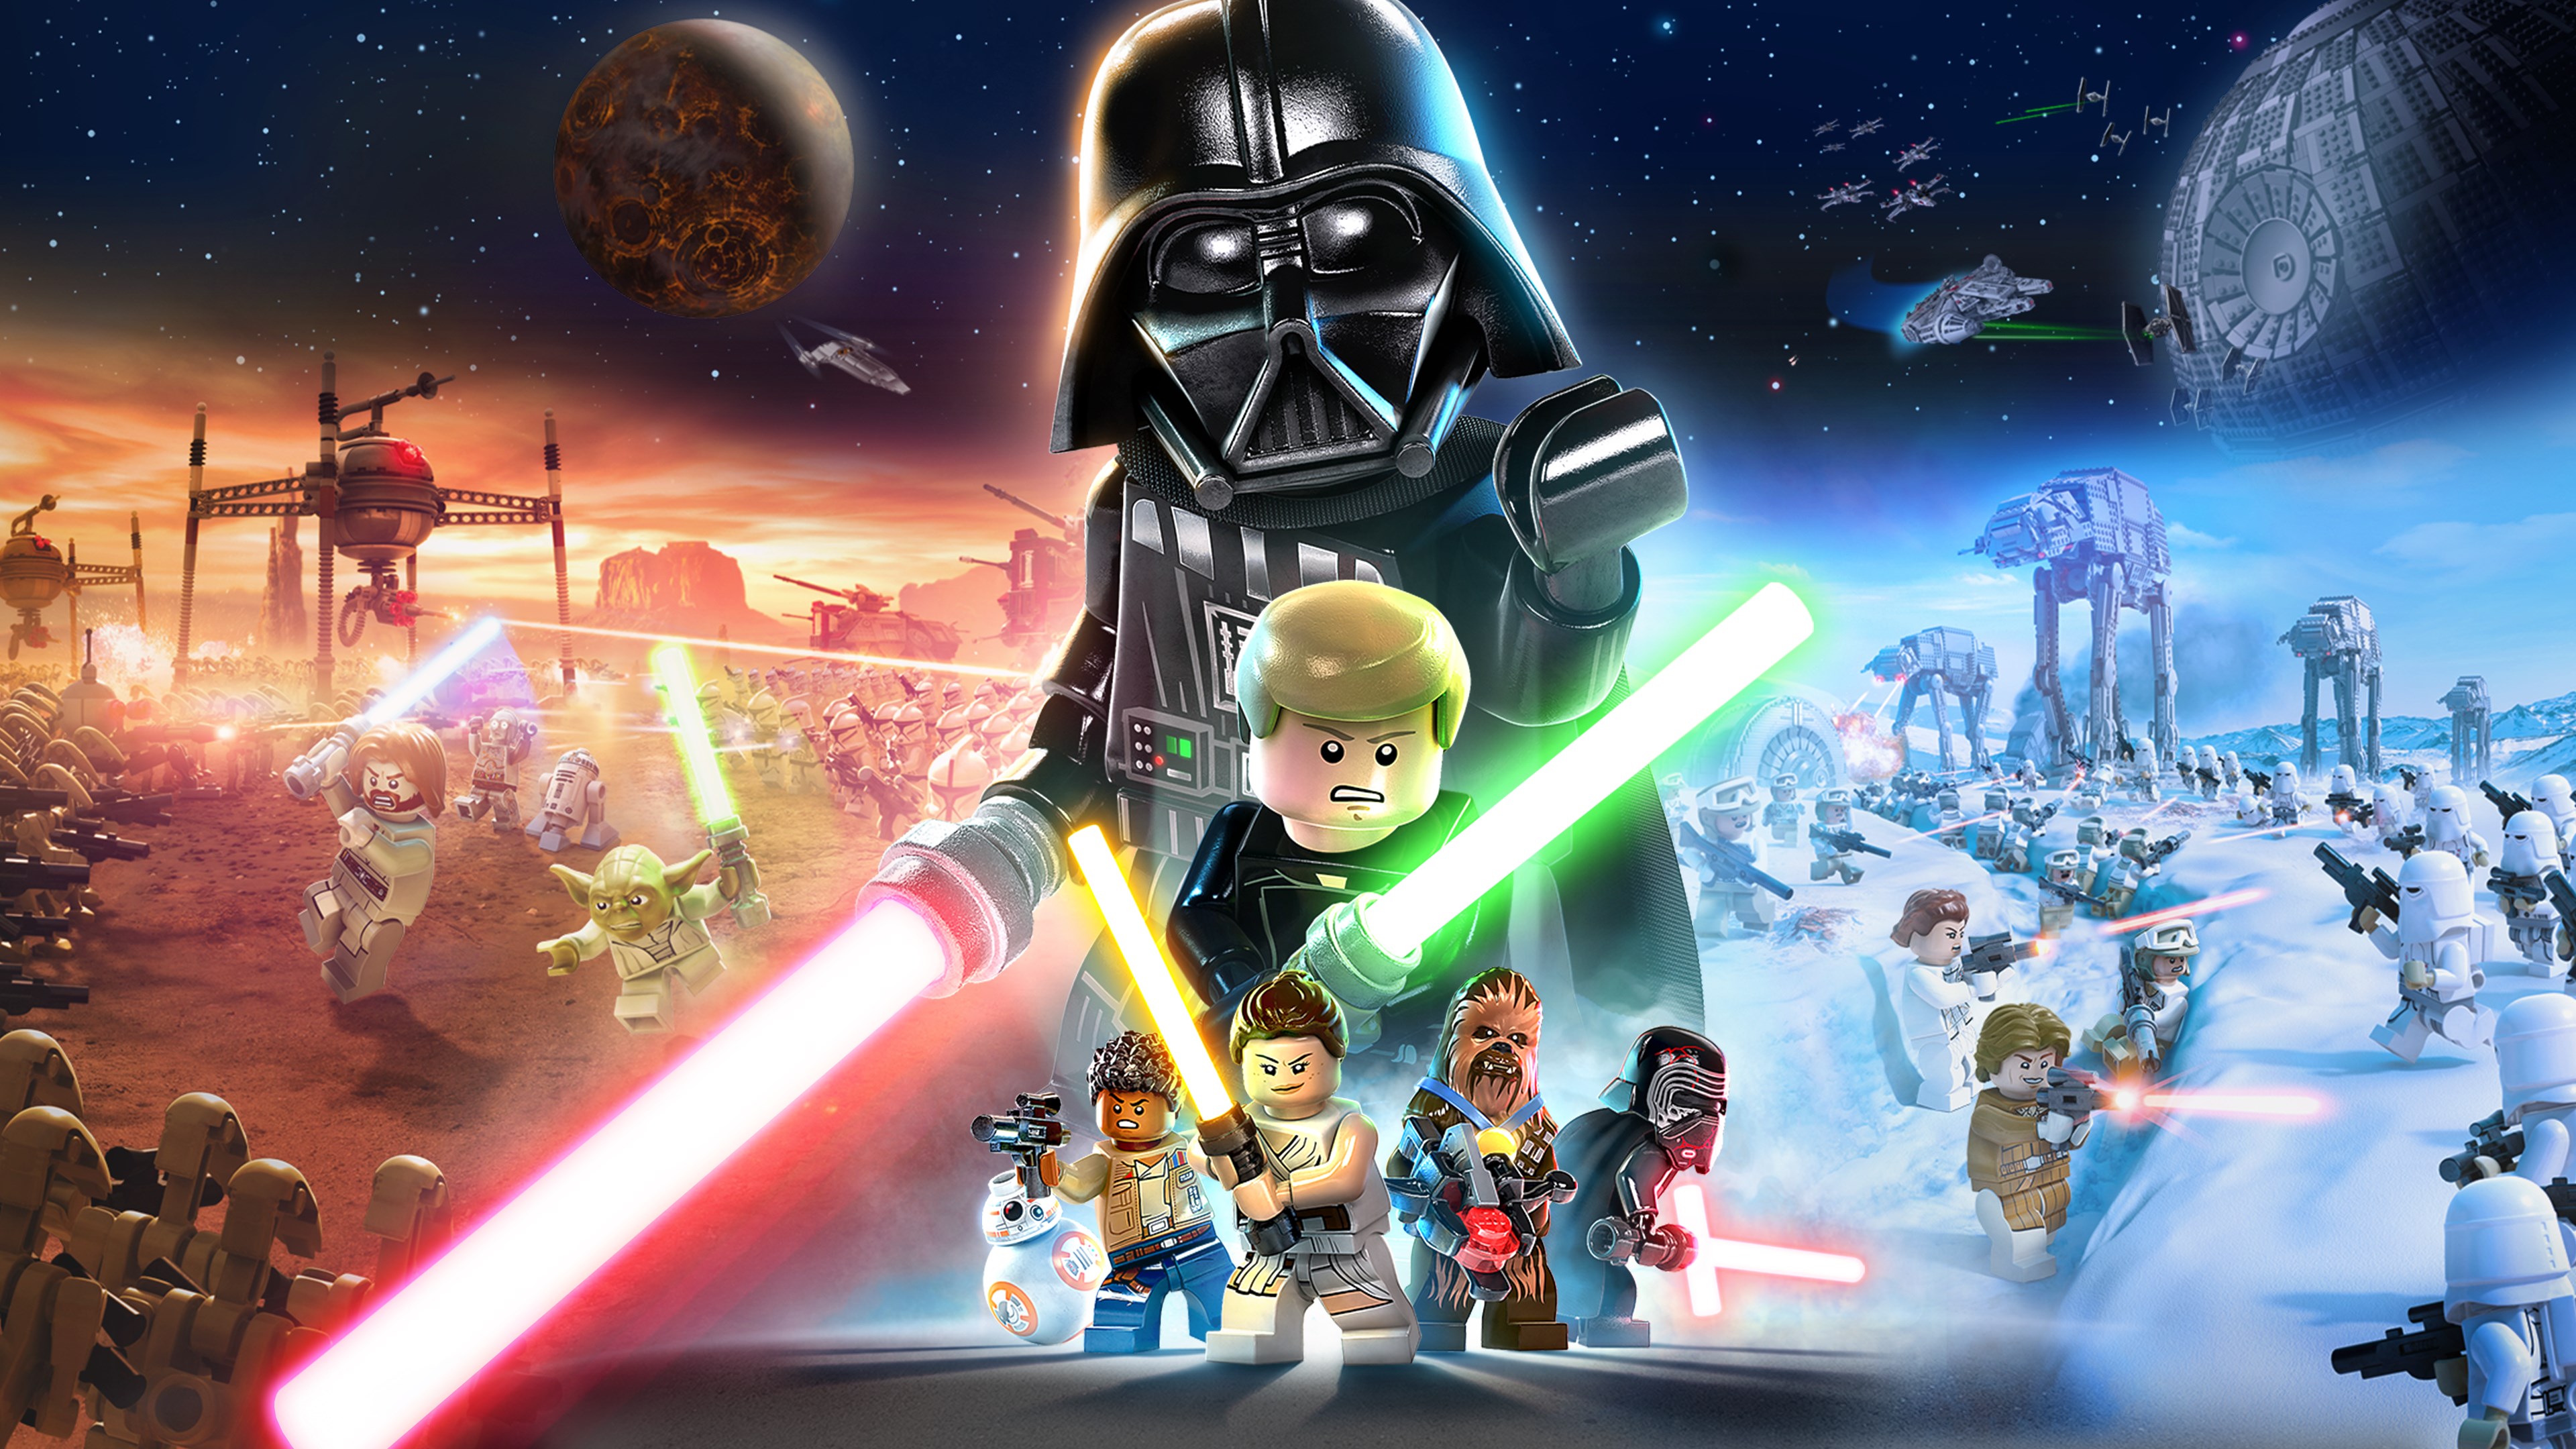 Video For LEGO Star Wars: The Skywalker Saga Is Now Available For Digital Pre-order And Pre-download On Xbox One And Xbox Series X|S